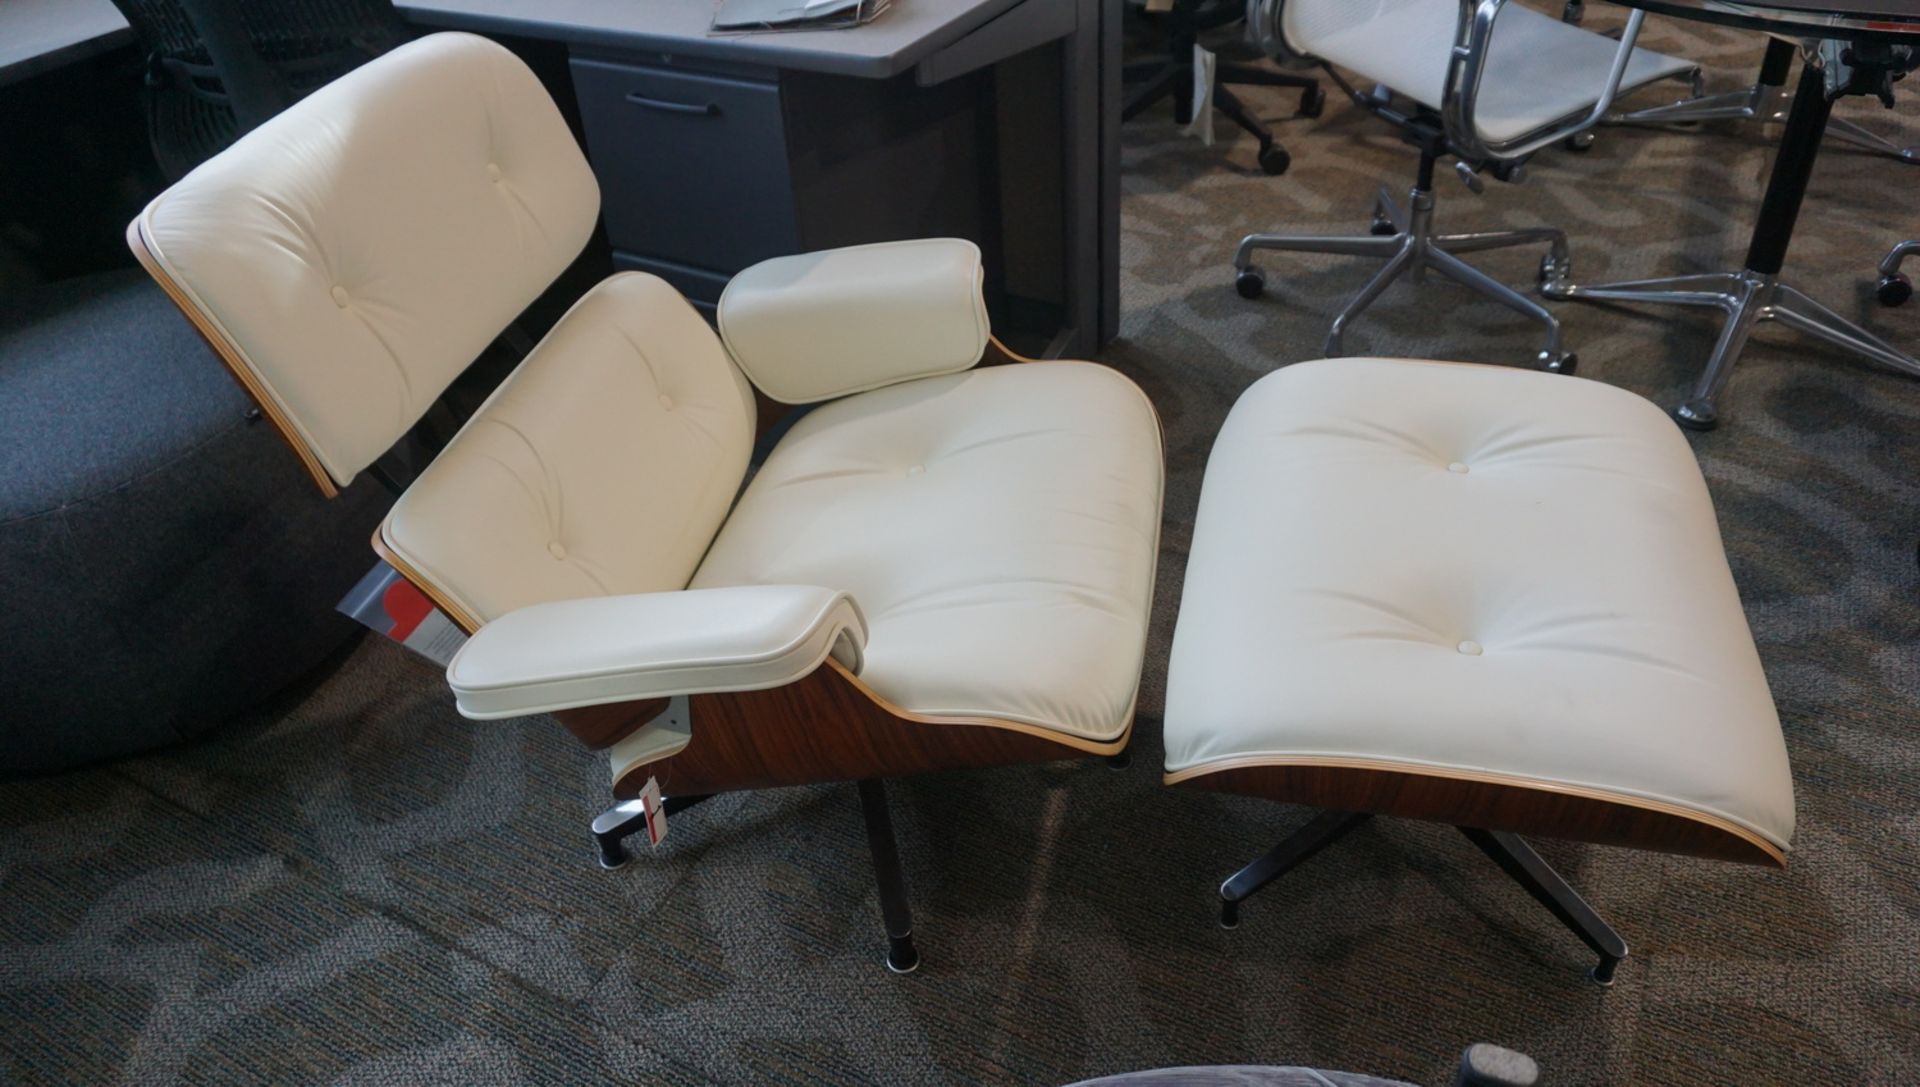 HERMAN MILLER EAMES ALPINE WHITE LEATHER LOUNGE CHAIR C/W OTTOMAN ($9,300 MSRP) - Image 2 of 3